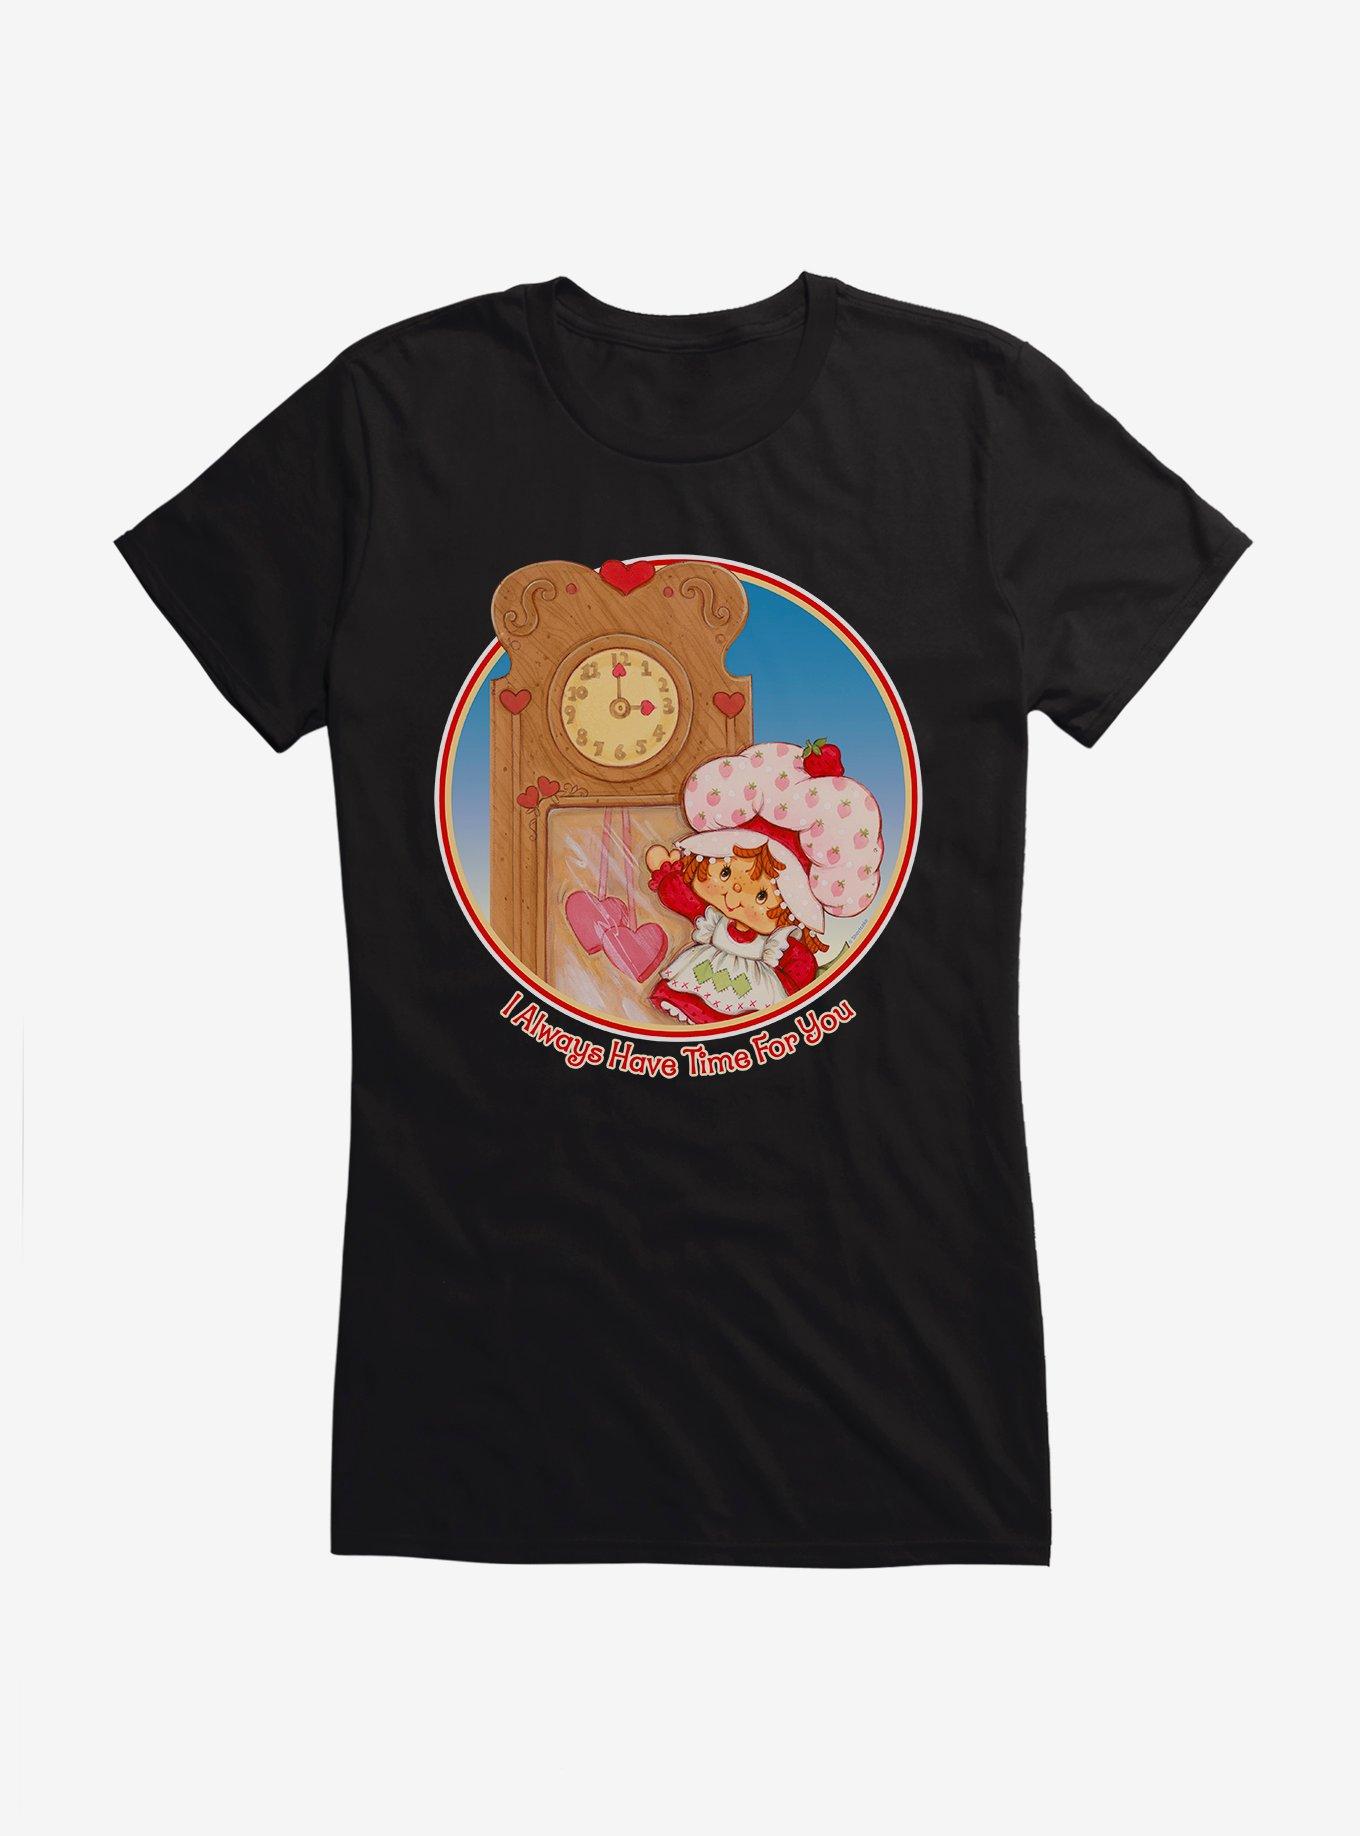 Strawberry Shortcake I Always Have Time For You Girls T-Shirt